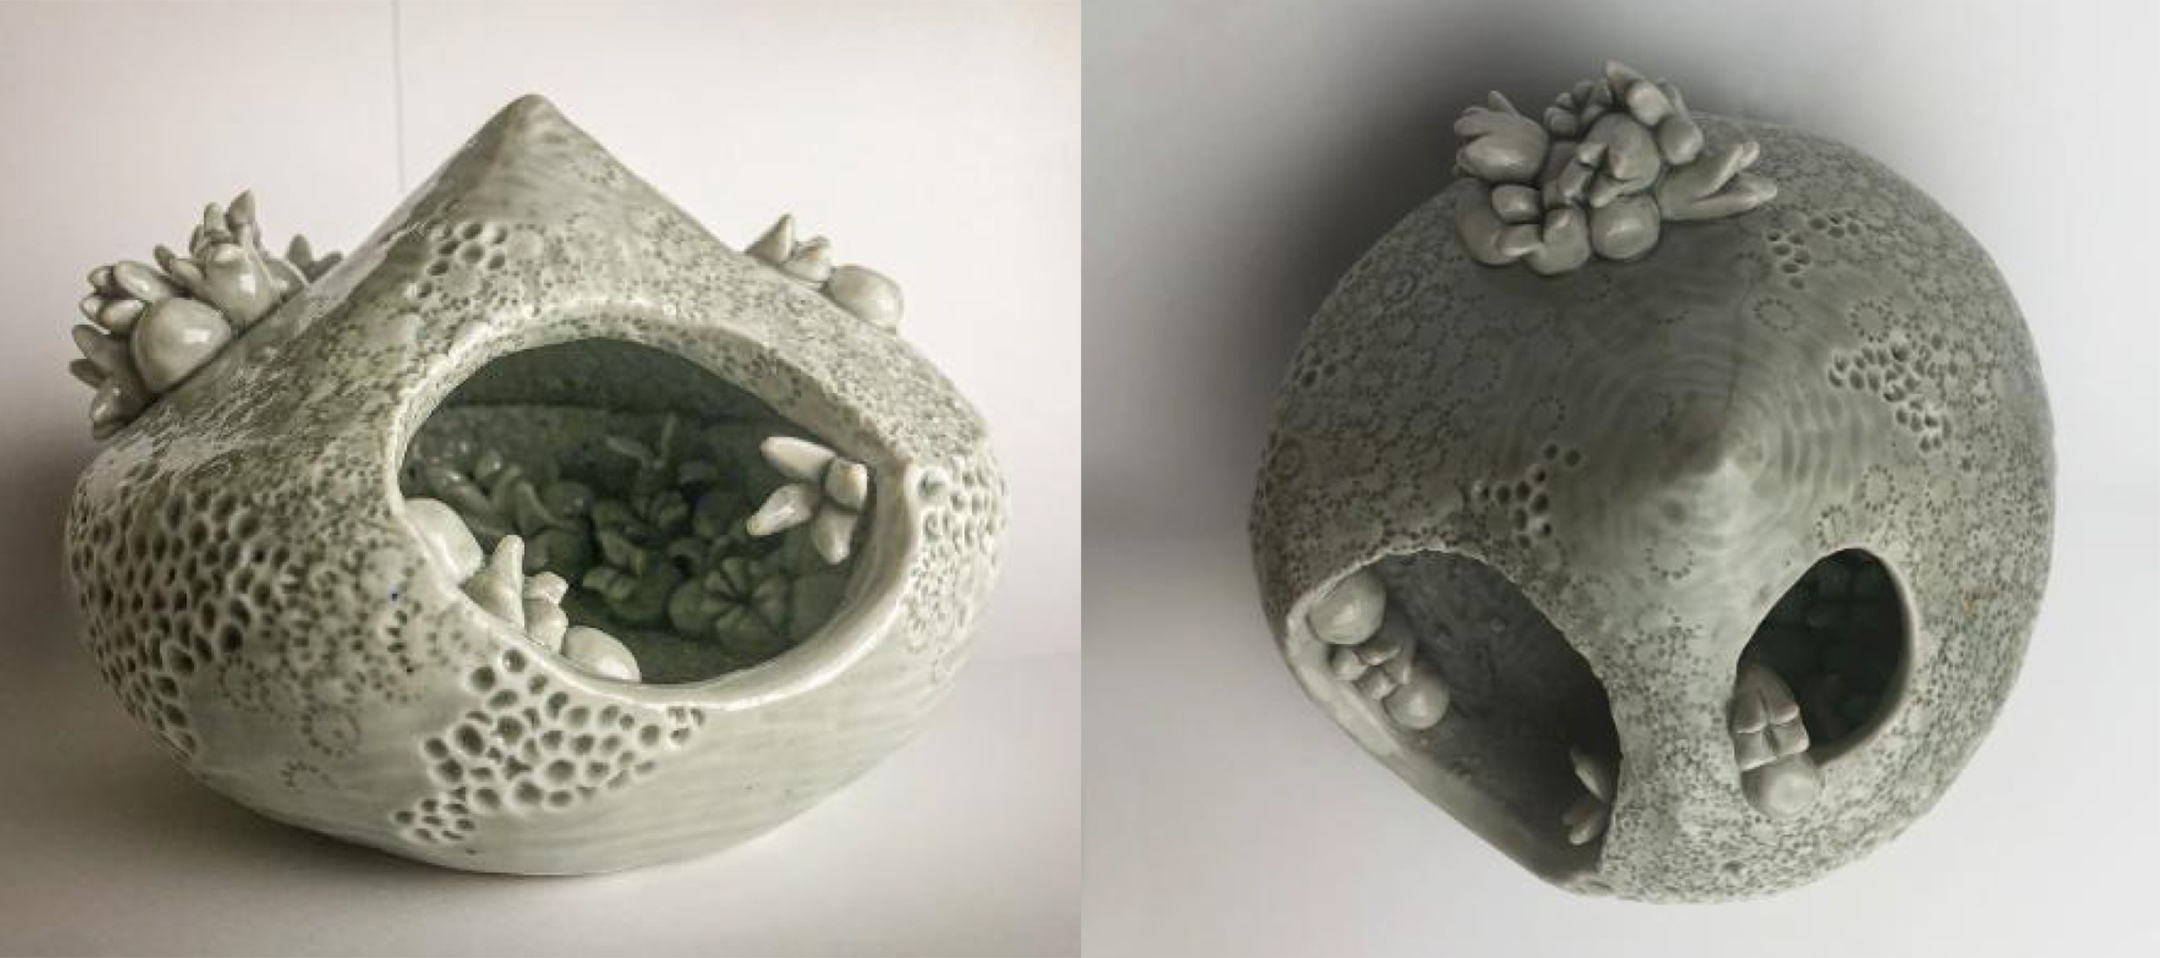 Two photos of a green water-drop shaped sculpture with elements carved into it